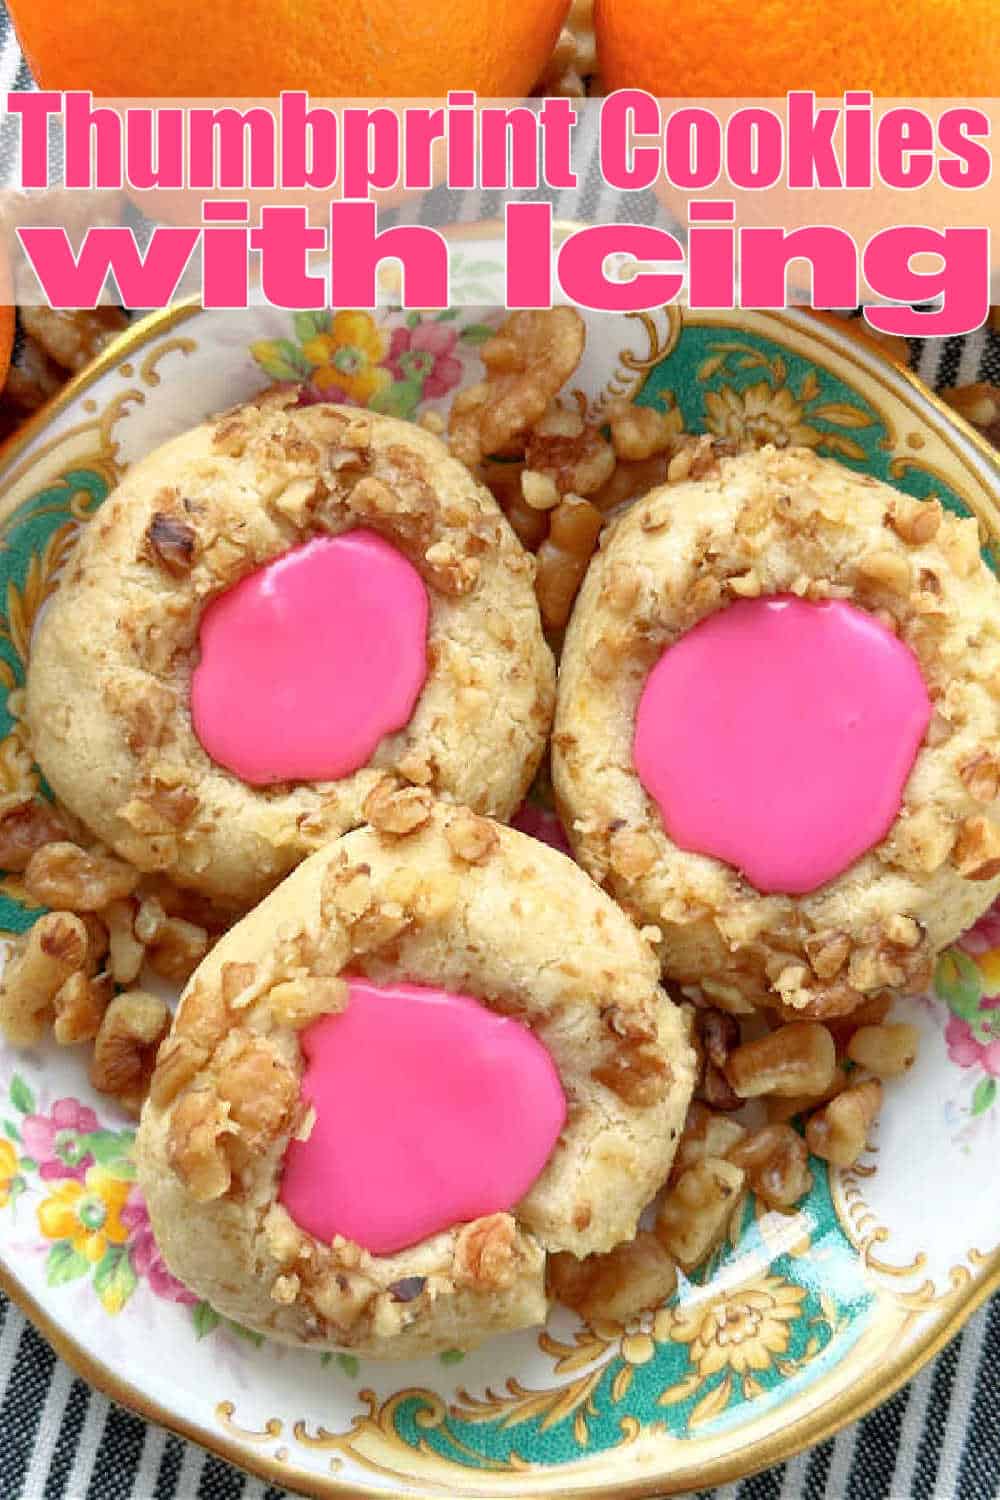 Thumbprint Cookies with Icing | Foodtastic Mom #cookierecipes #thumbprintcookies